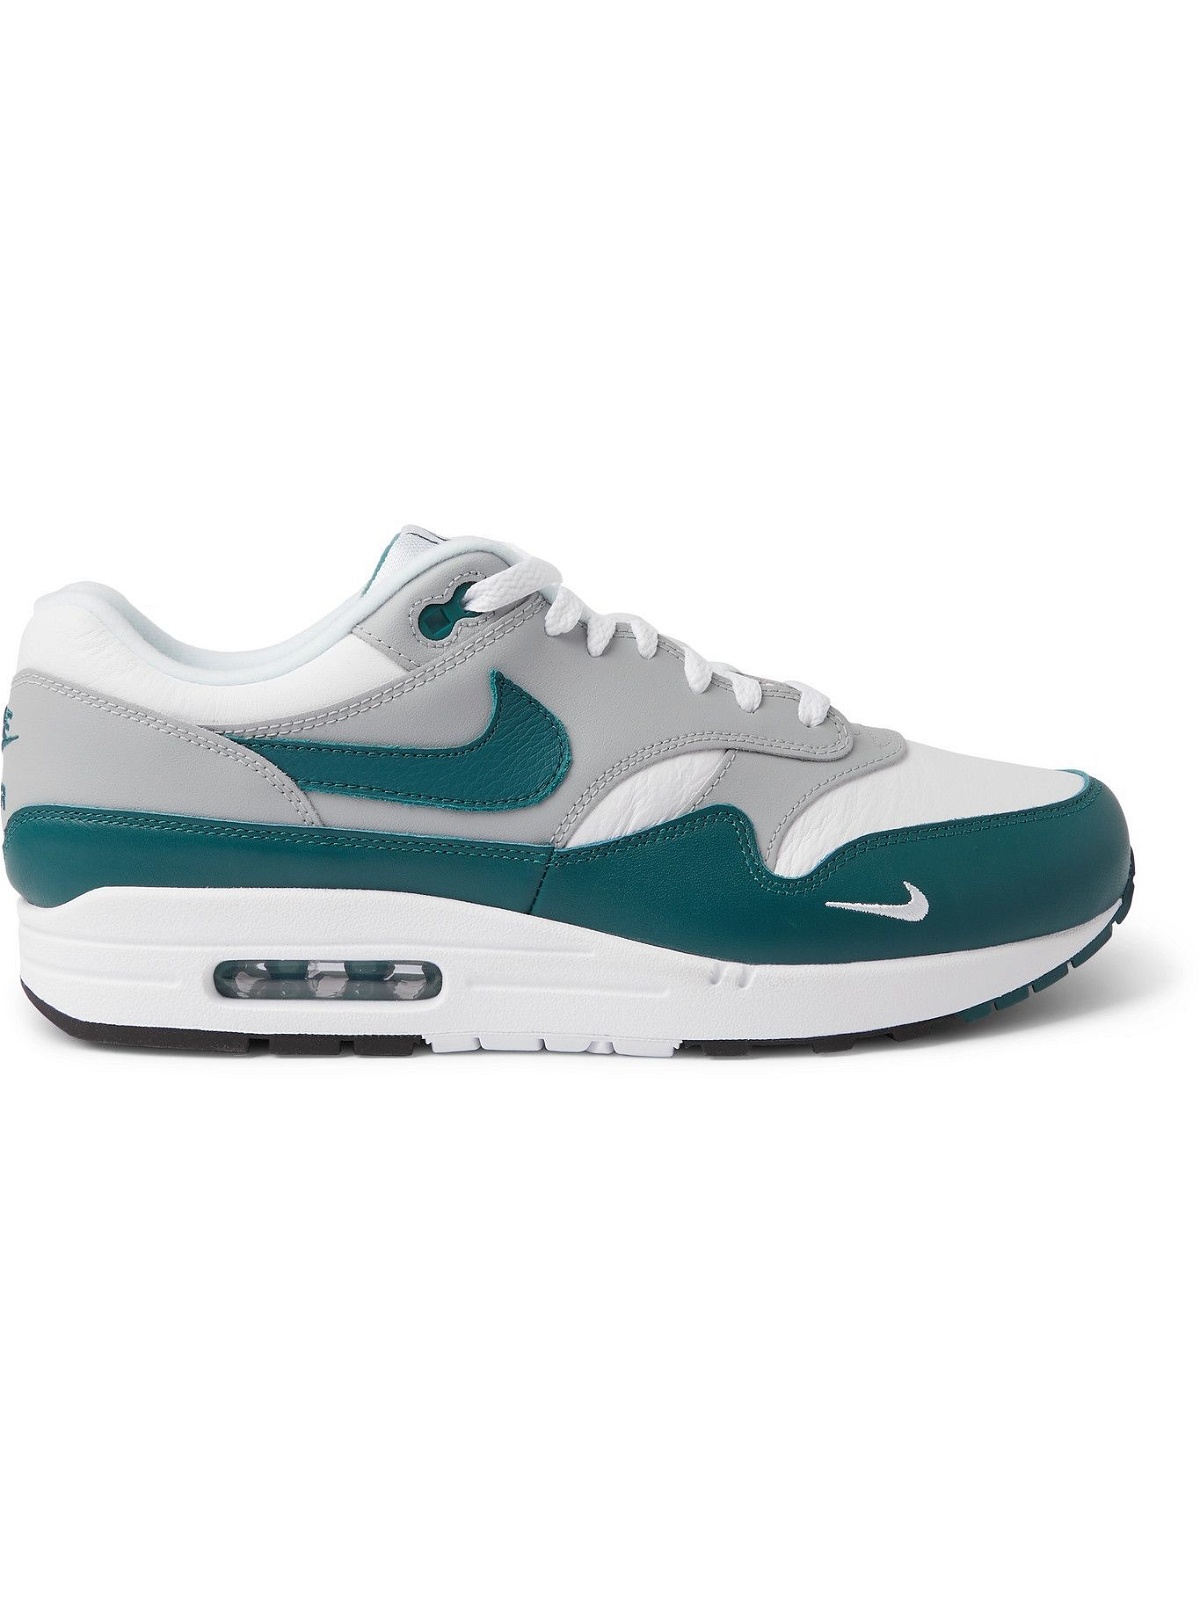 NIKE - Air Max 1 LV8 Leather Sneakers - Gray Nike